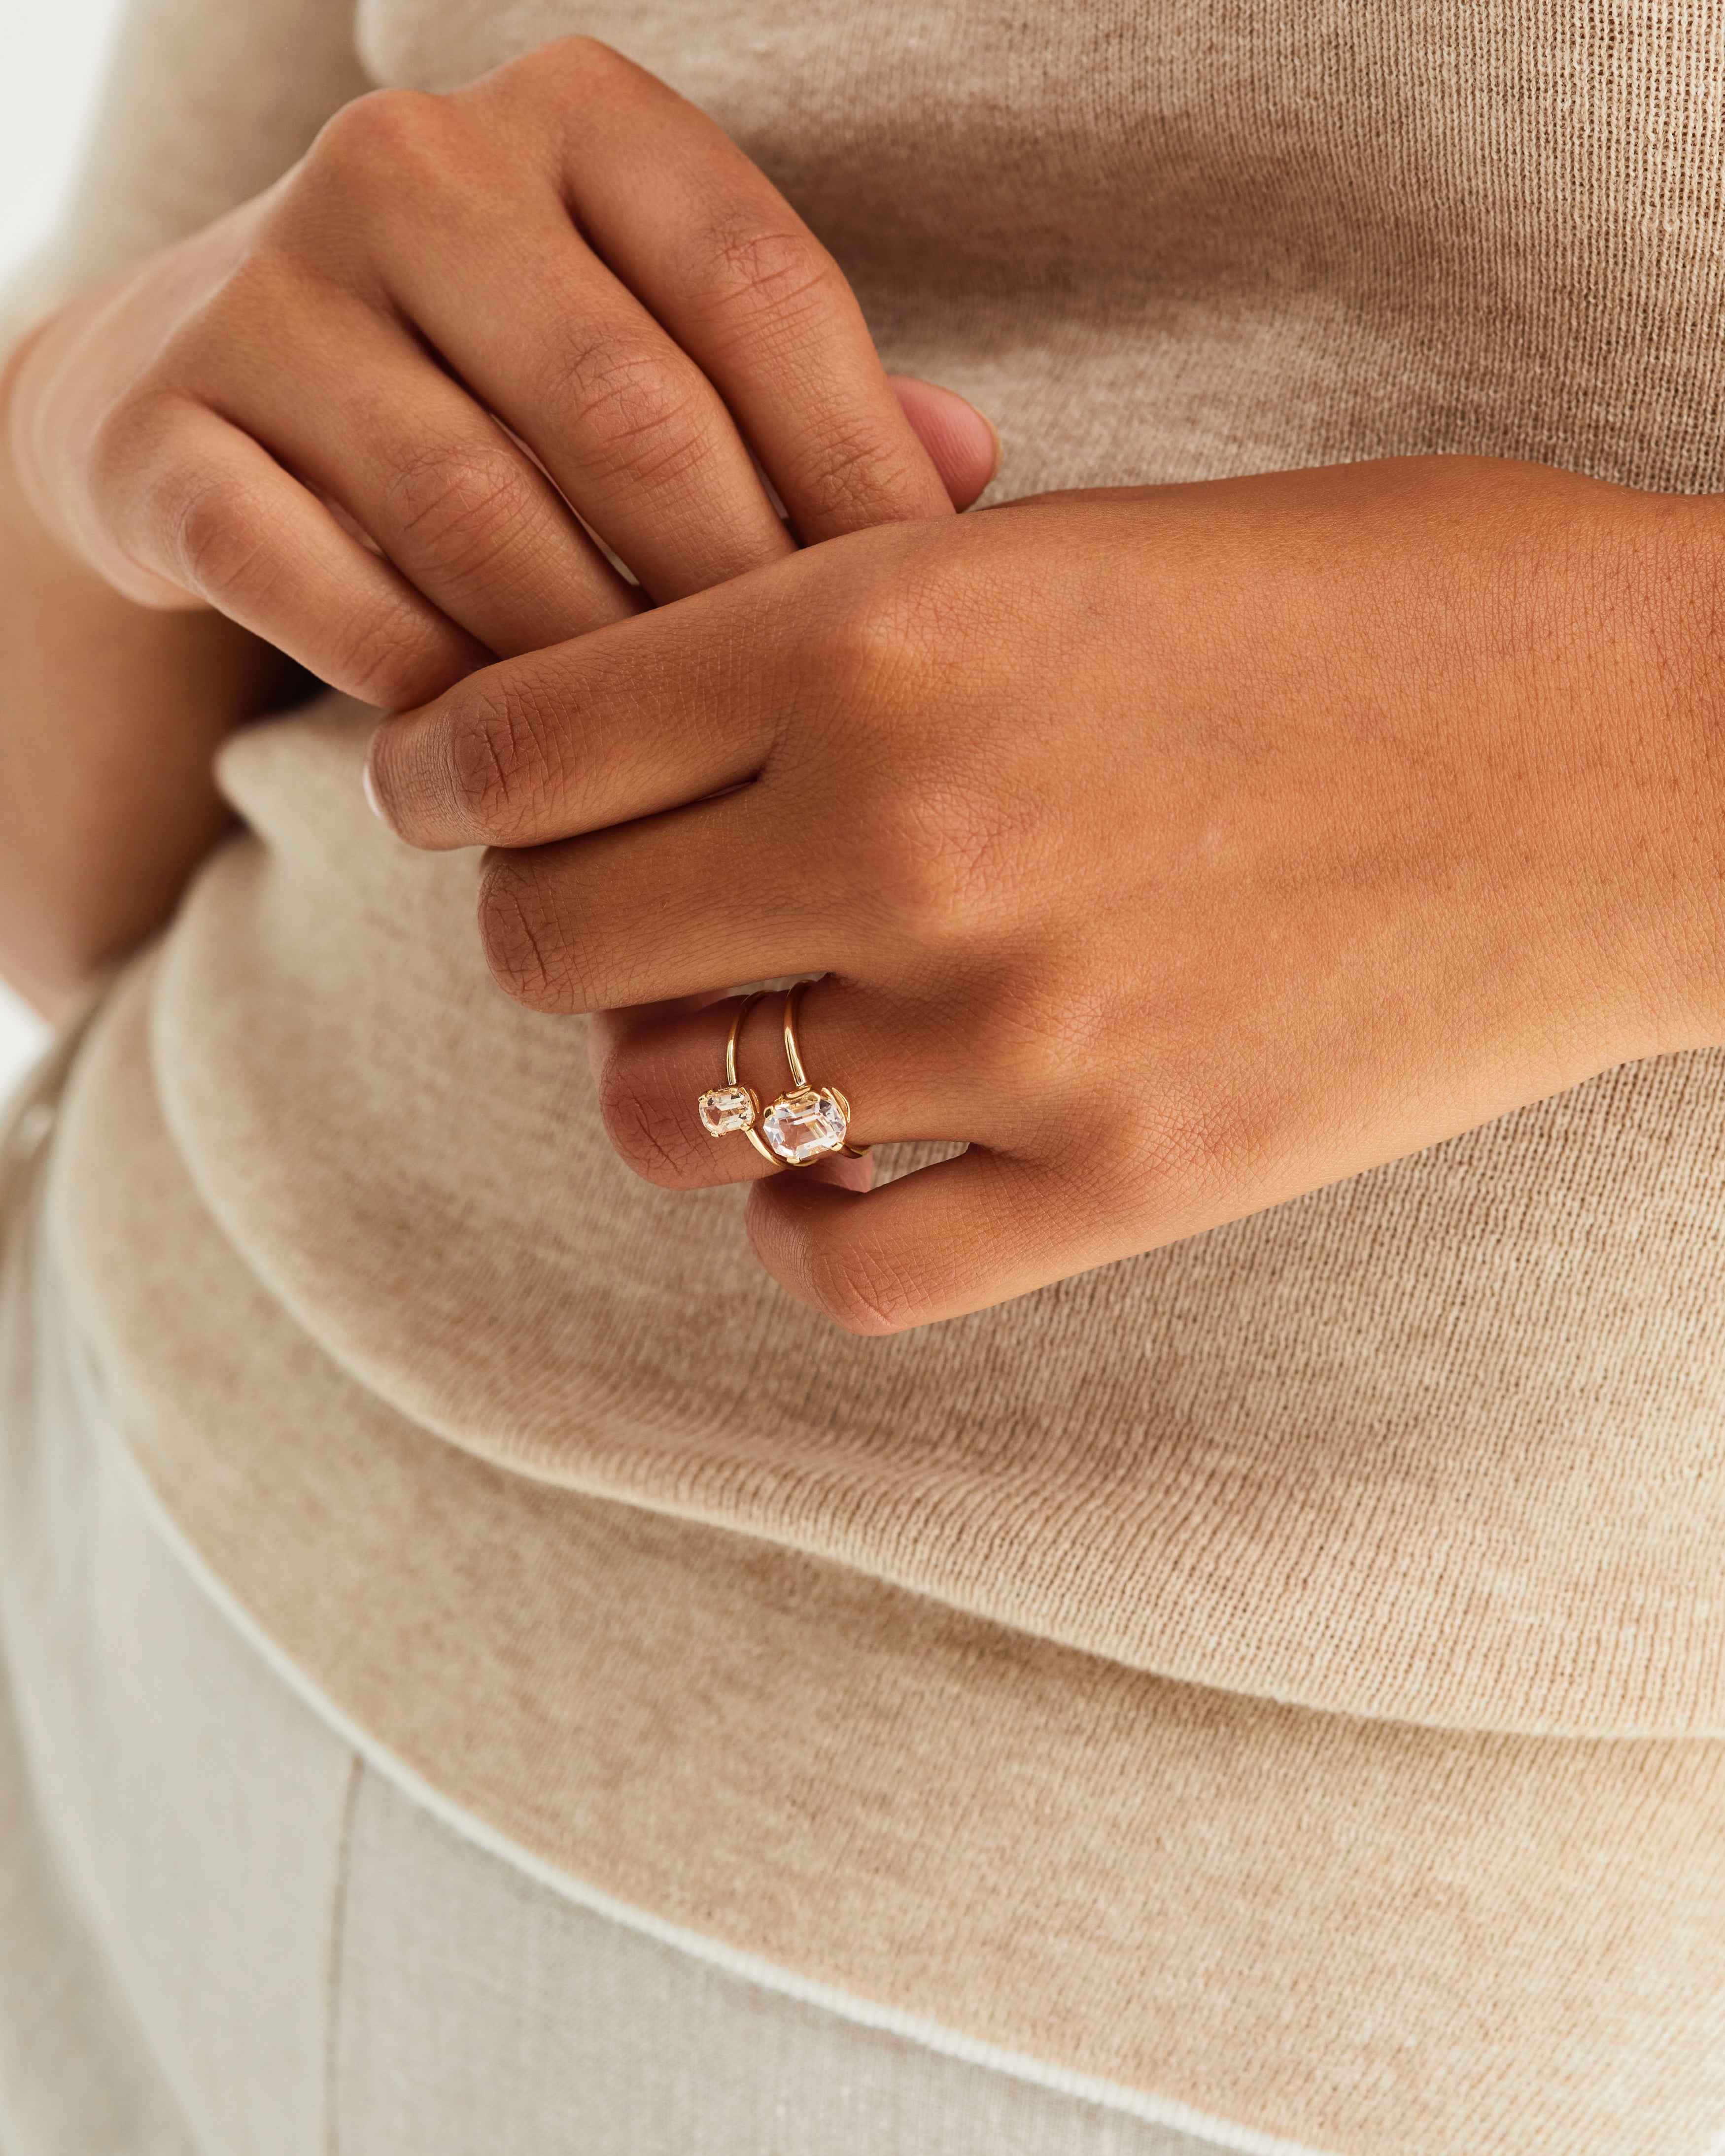 A woman's hands, showcasing the Fei Ring | Morganite and Tiny Fei Ring | Morganite, both in yellow gold.